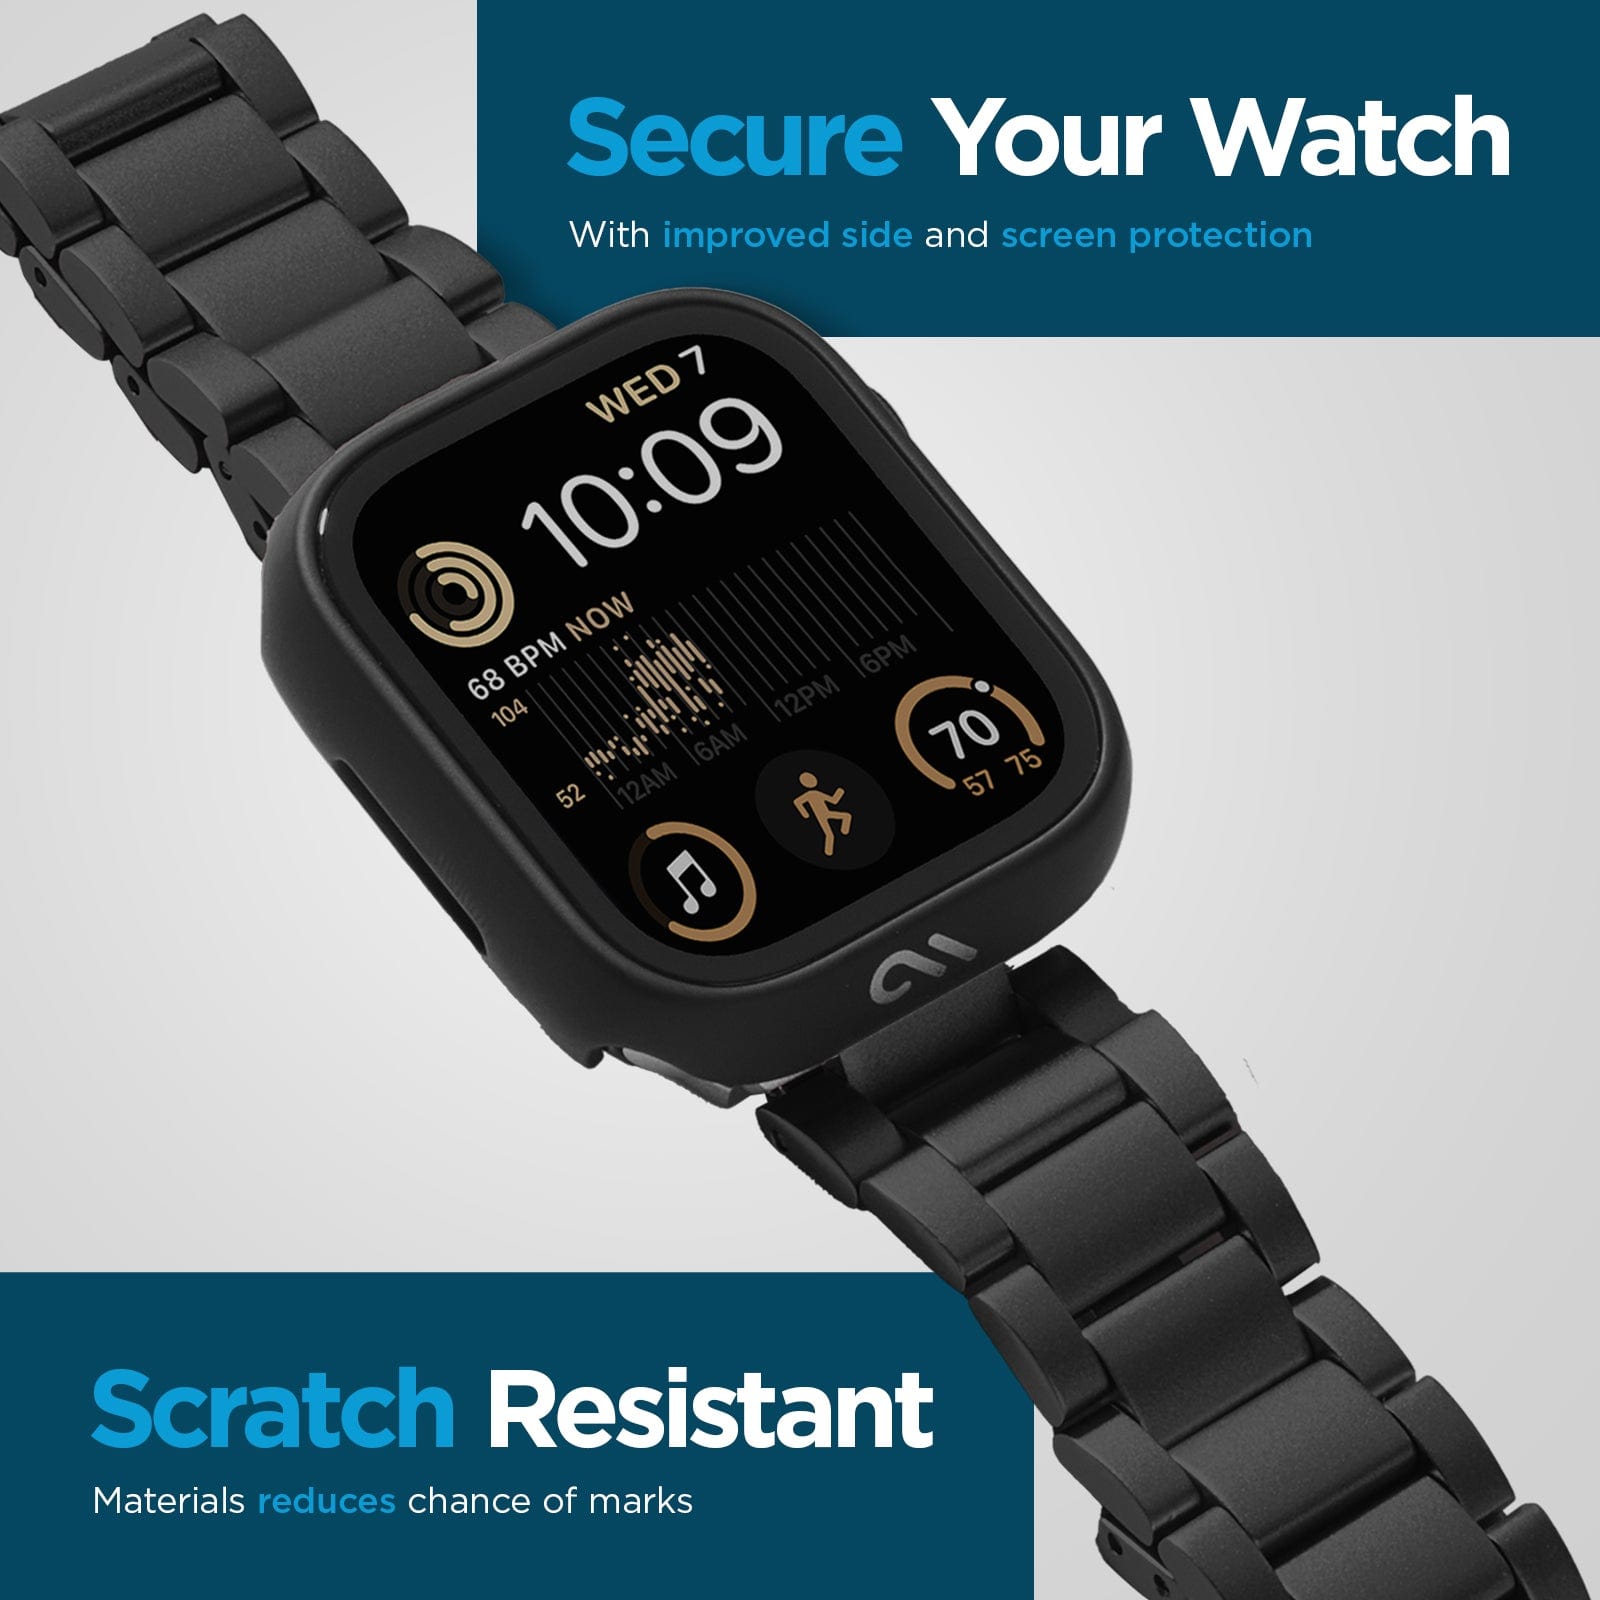 SECURE YOUR WATCH WITH IMPROVED SIDE AND SCREEN PROTECTION. SCRATCH RESISTANT MATERIALS REDUCES CHANCE OF MARKS